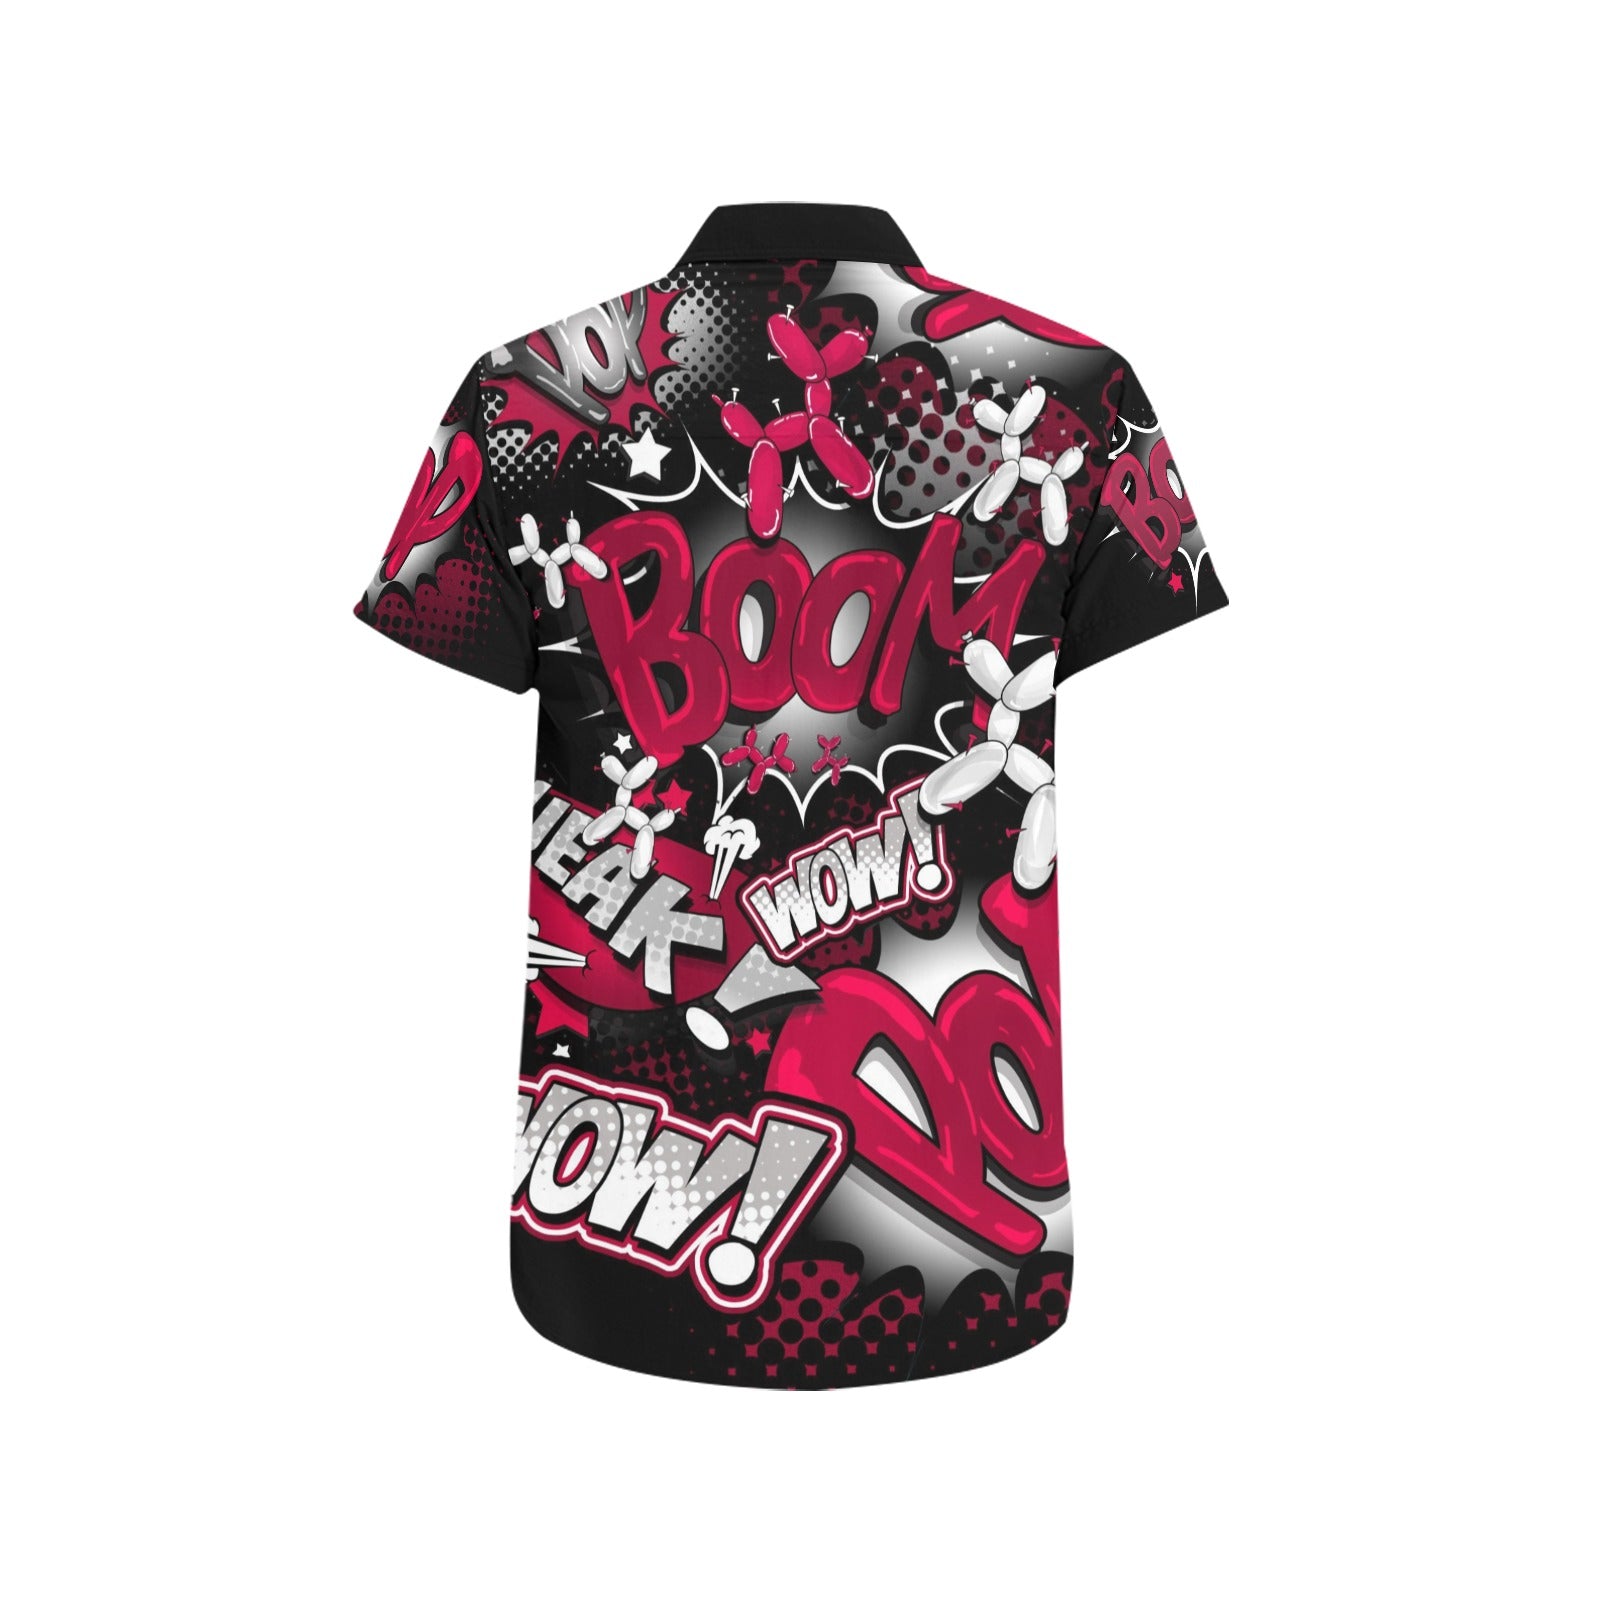 Party shirt with balloon dogs black white and red